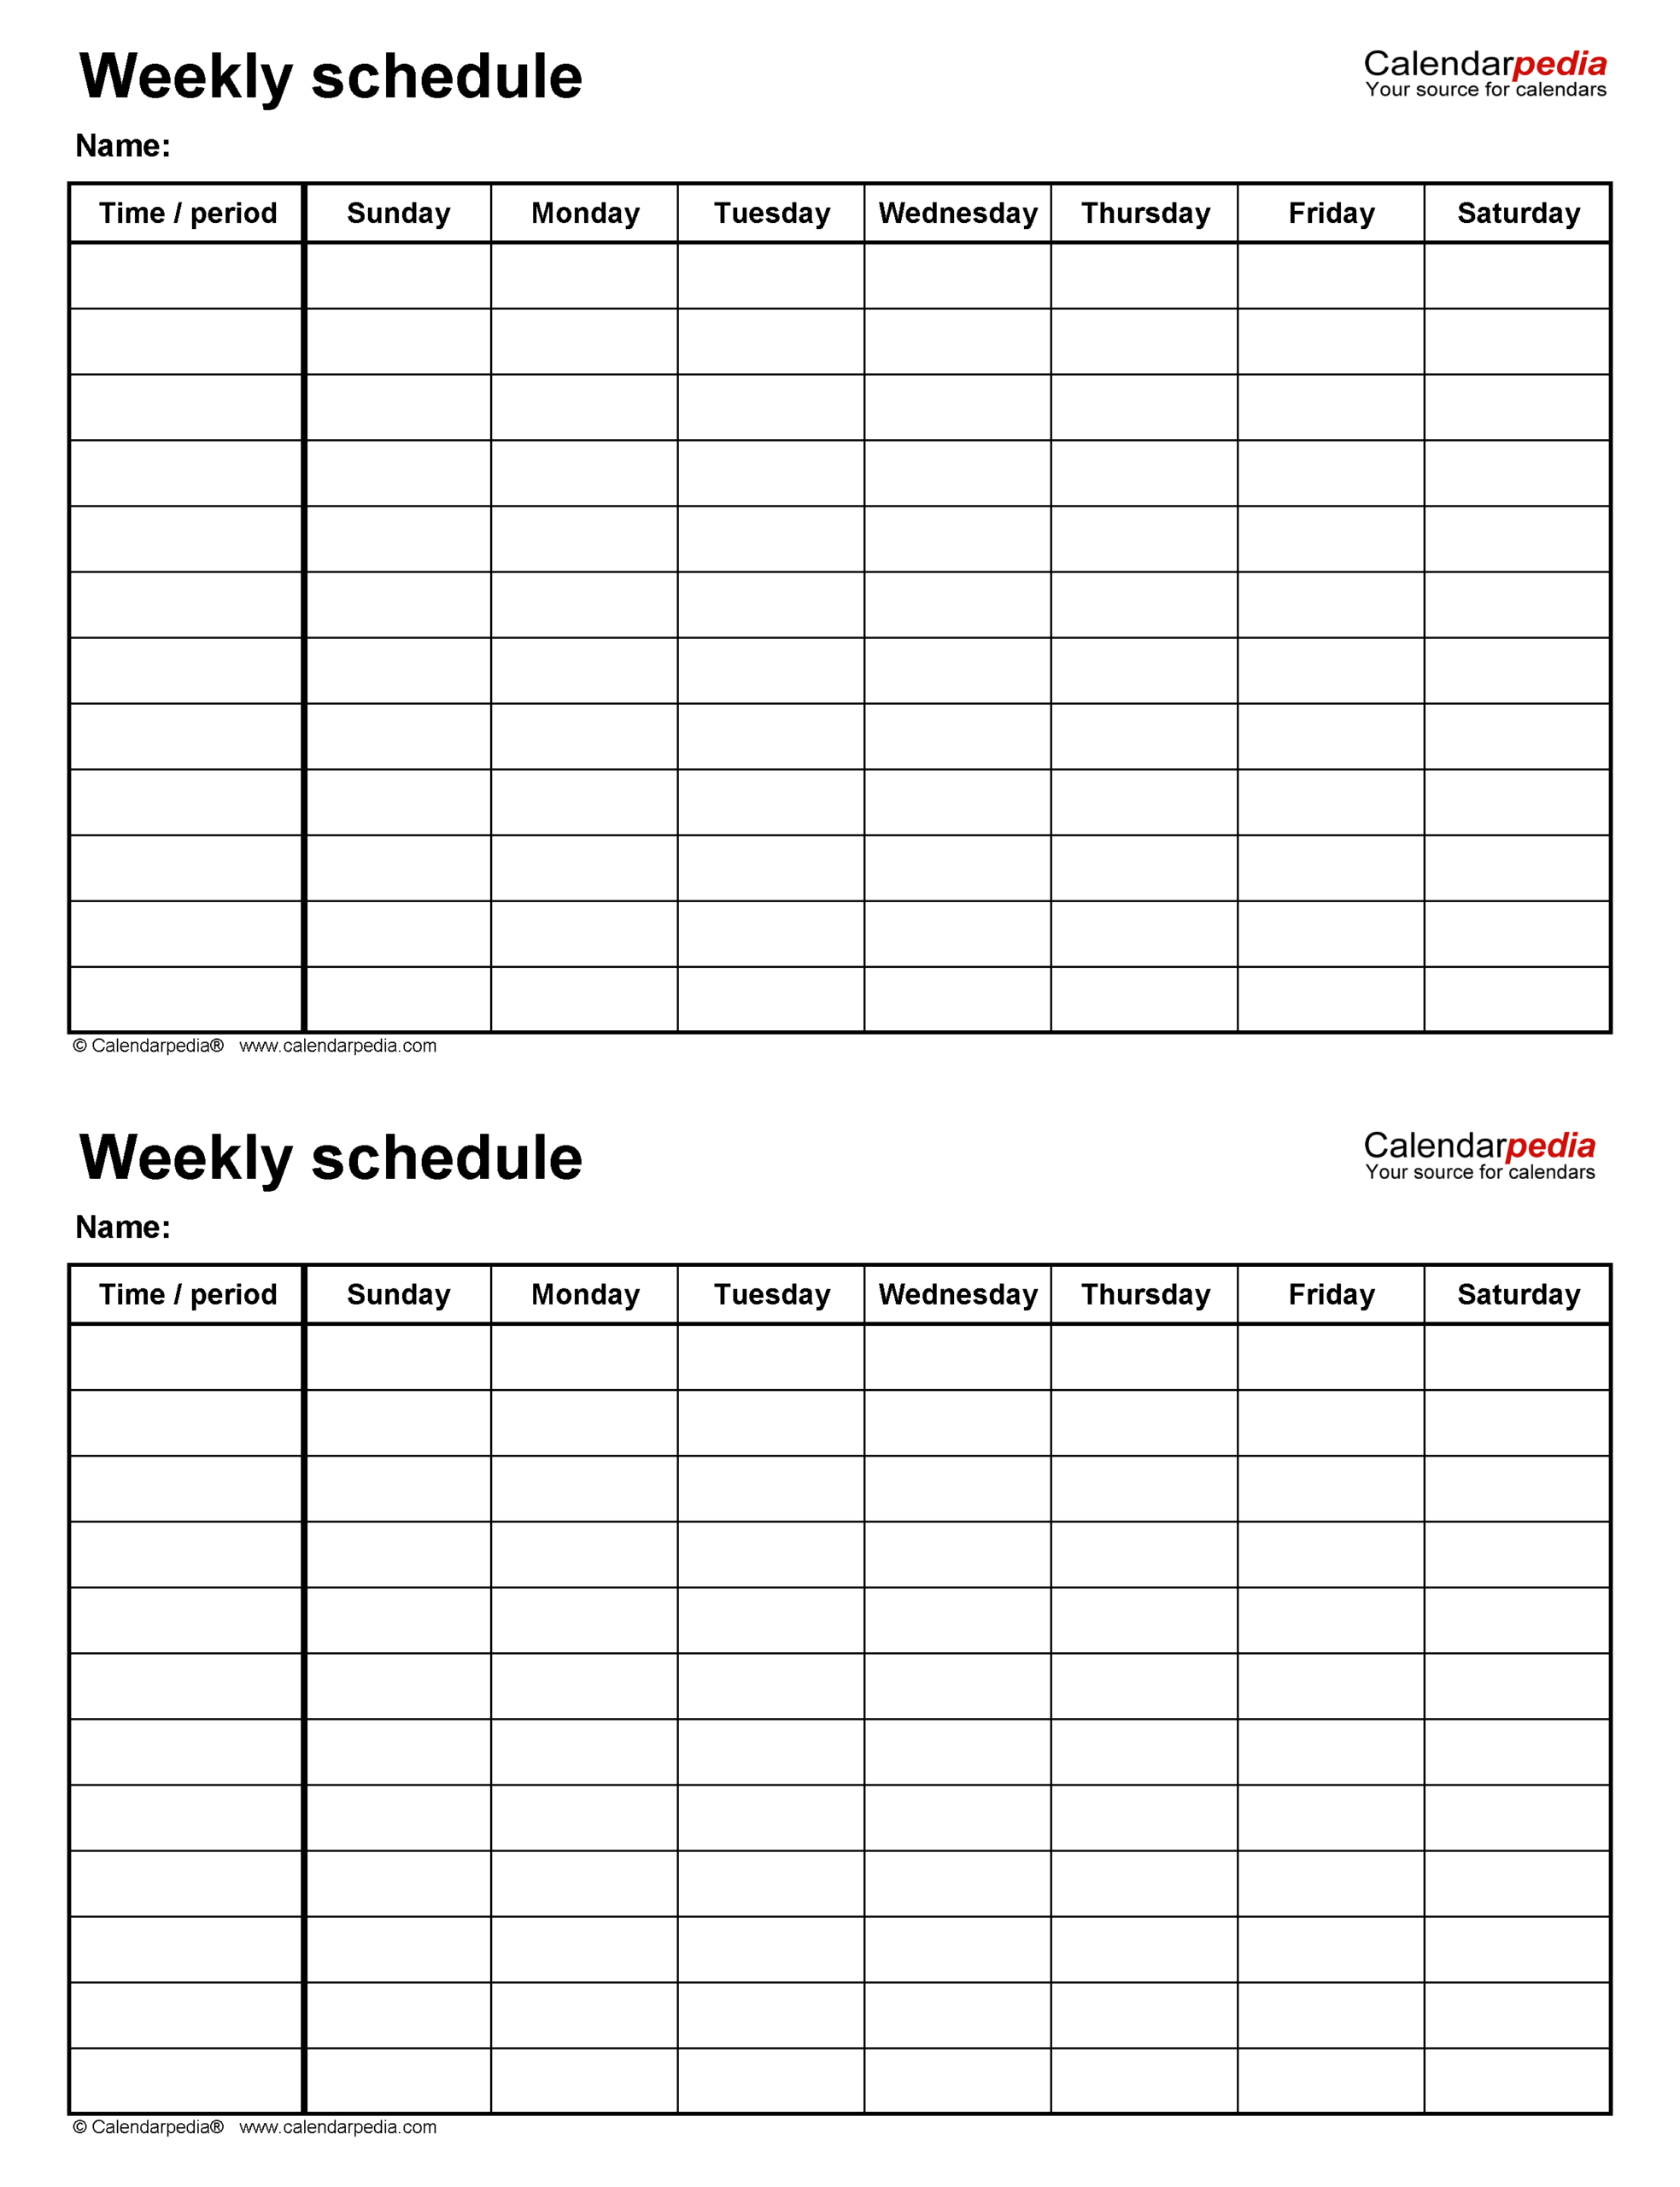 Free Weekly Schedule Templates For Excel  18 Templates with One Week Calendar Template Excel